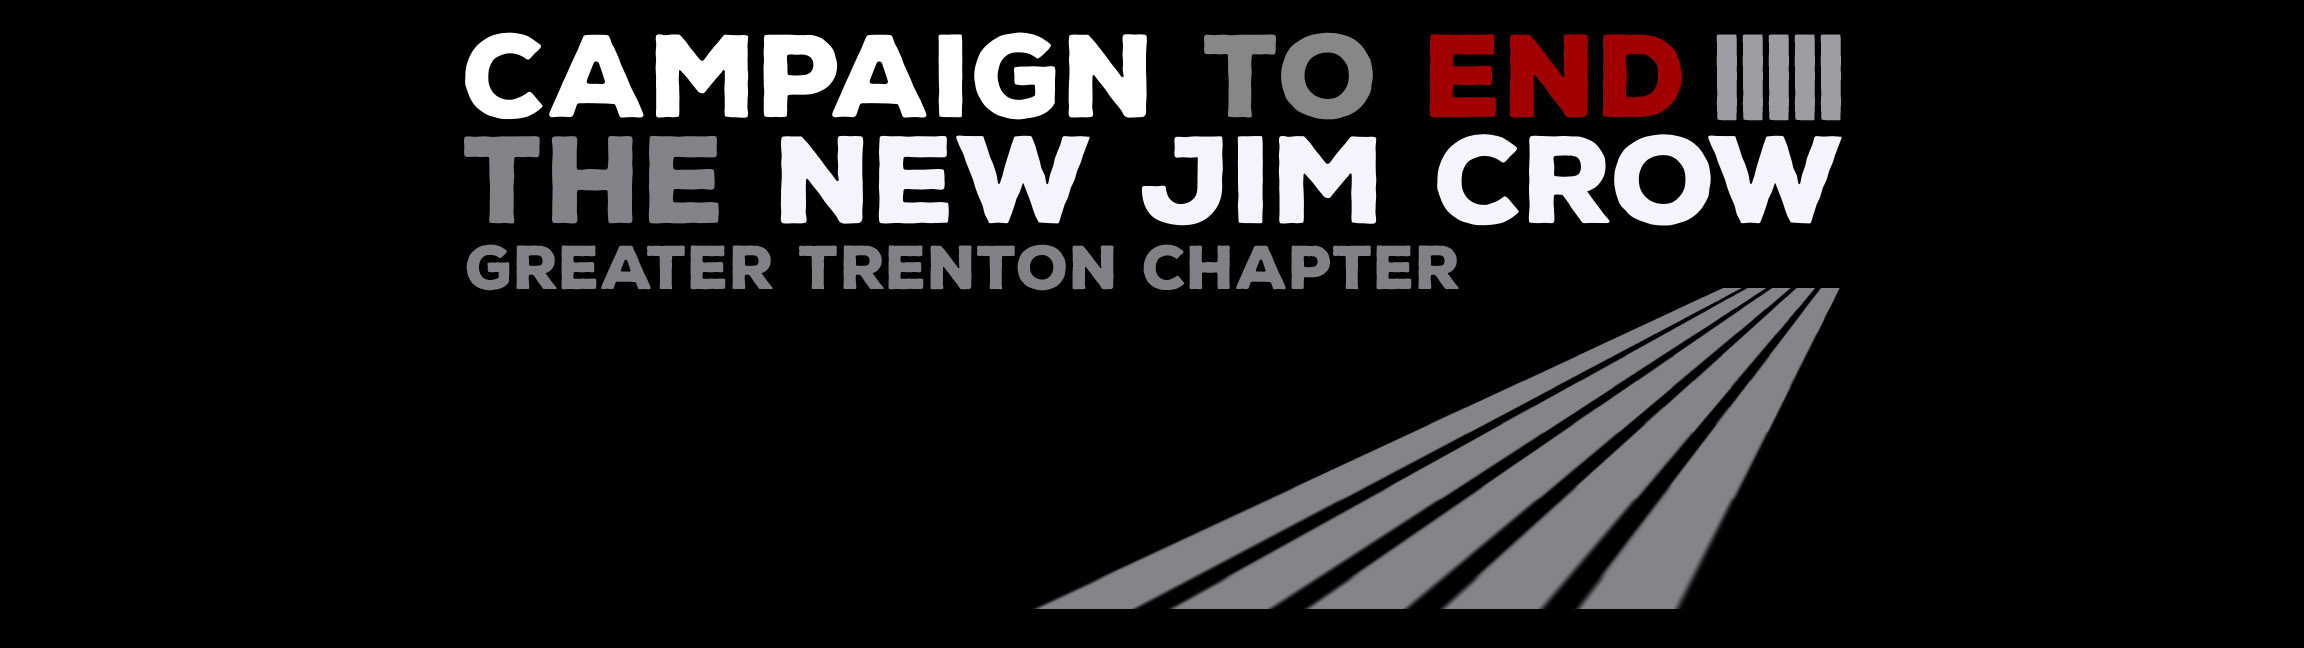 The Campaign to End the New Jim Crow - Trenton/Princeton Chapter